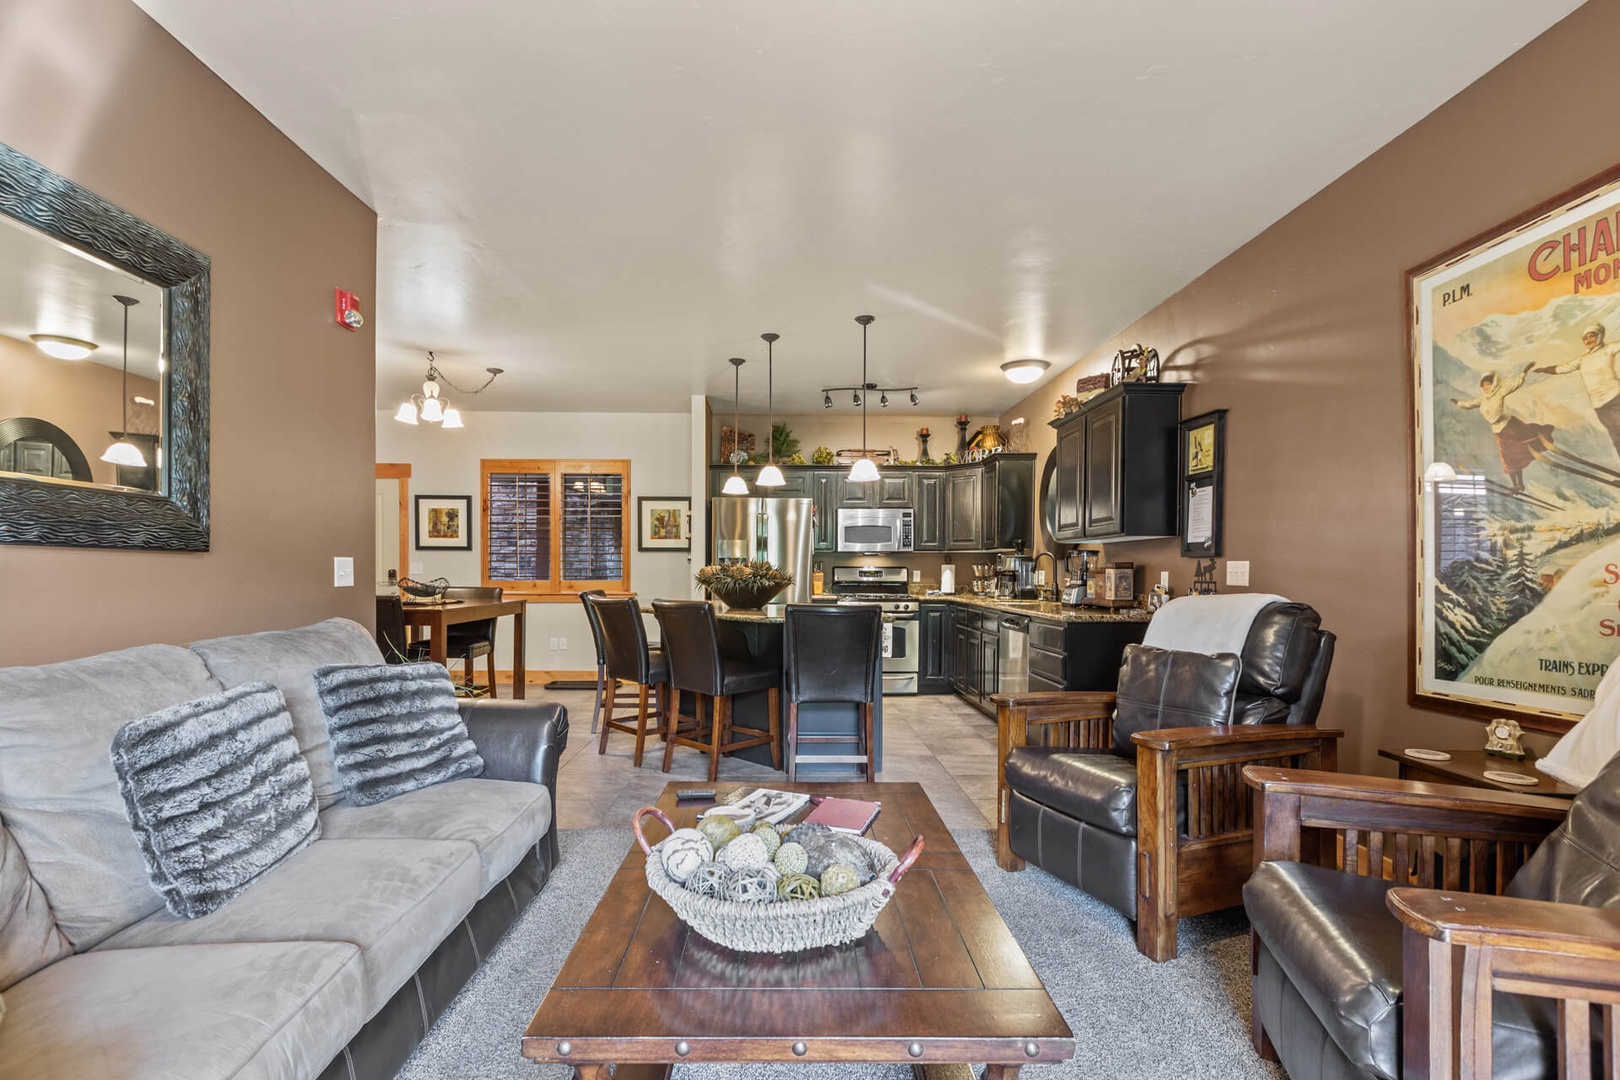 Bear Hollow Lodges 1304:  Gathering and entertaining is welcome with the open floor plan offering plenty of seating, tables for eating and games and easy kitchen access.